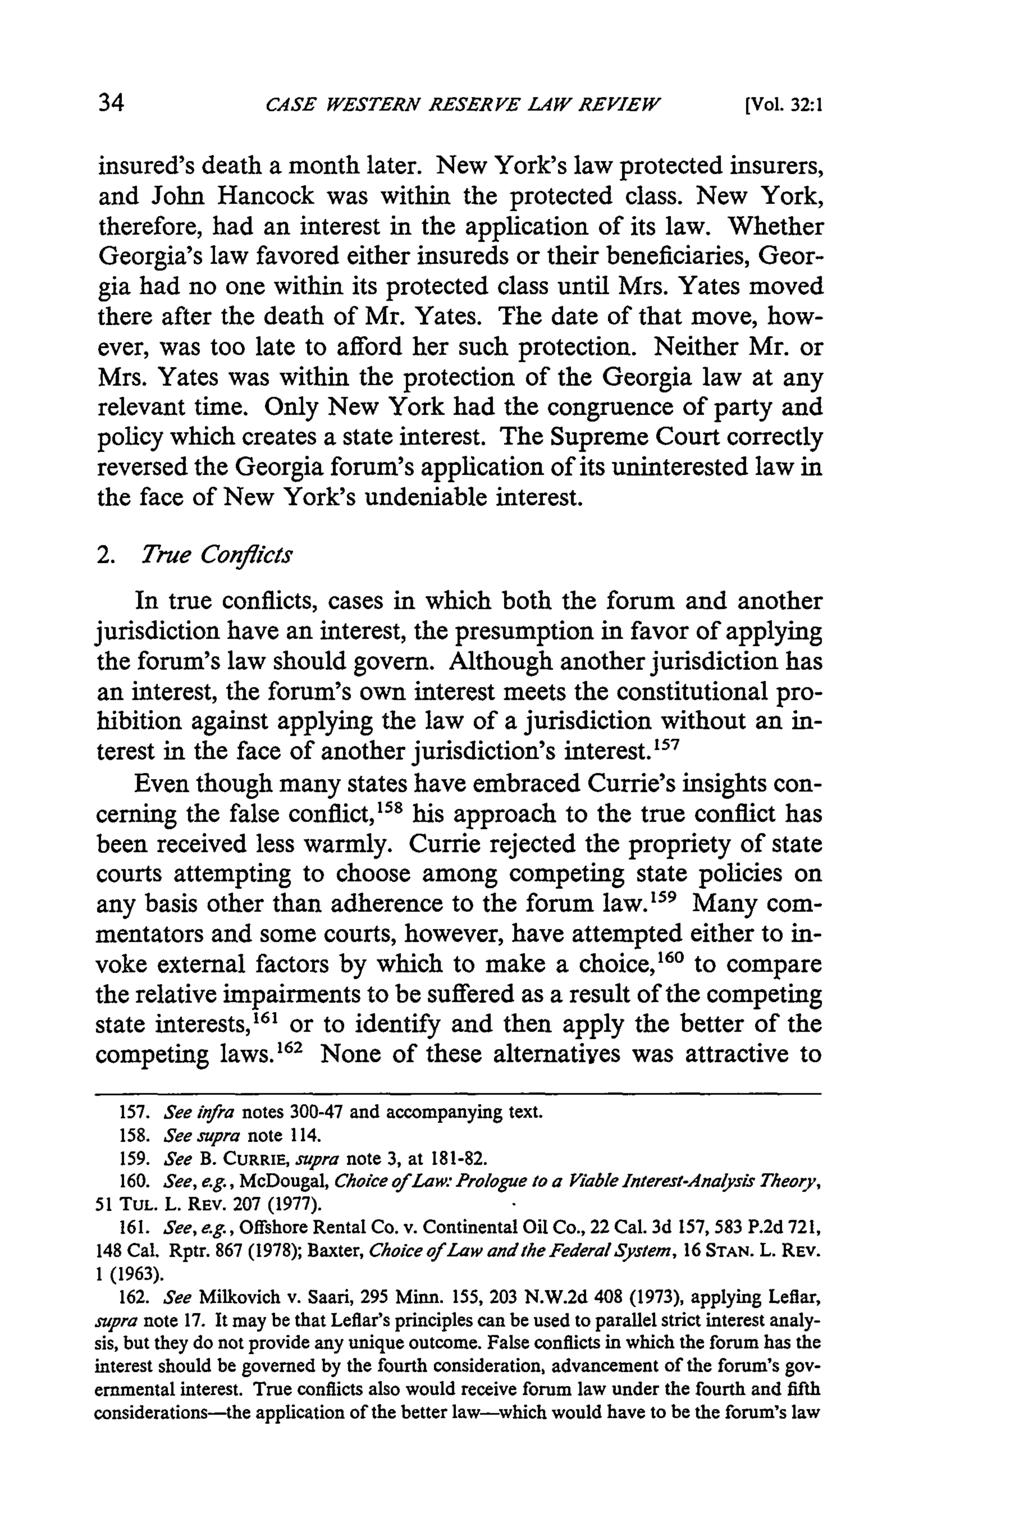 CASE WESTERN RESERVE LAW REVIEW [Vol. 32:1 insured's death a month later. New York's law protected insurers, and John Hancock was within the protected class.